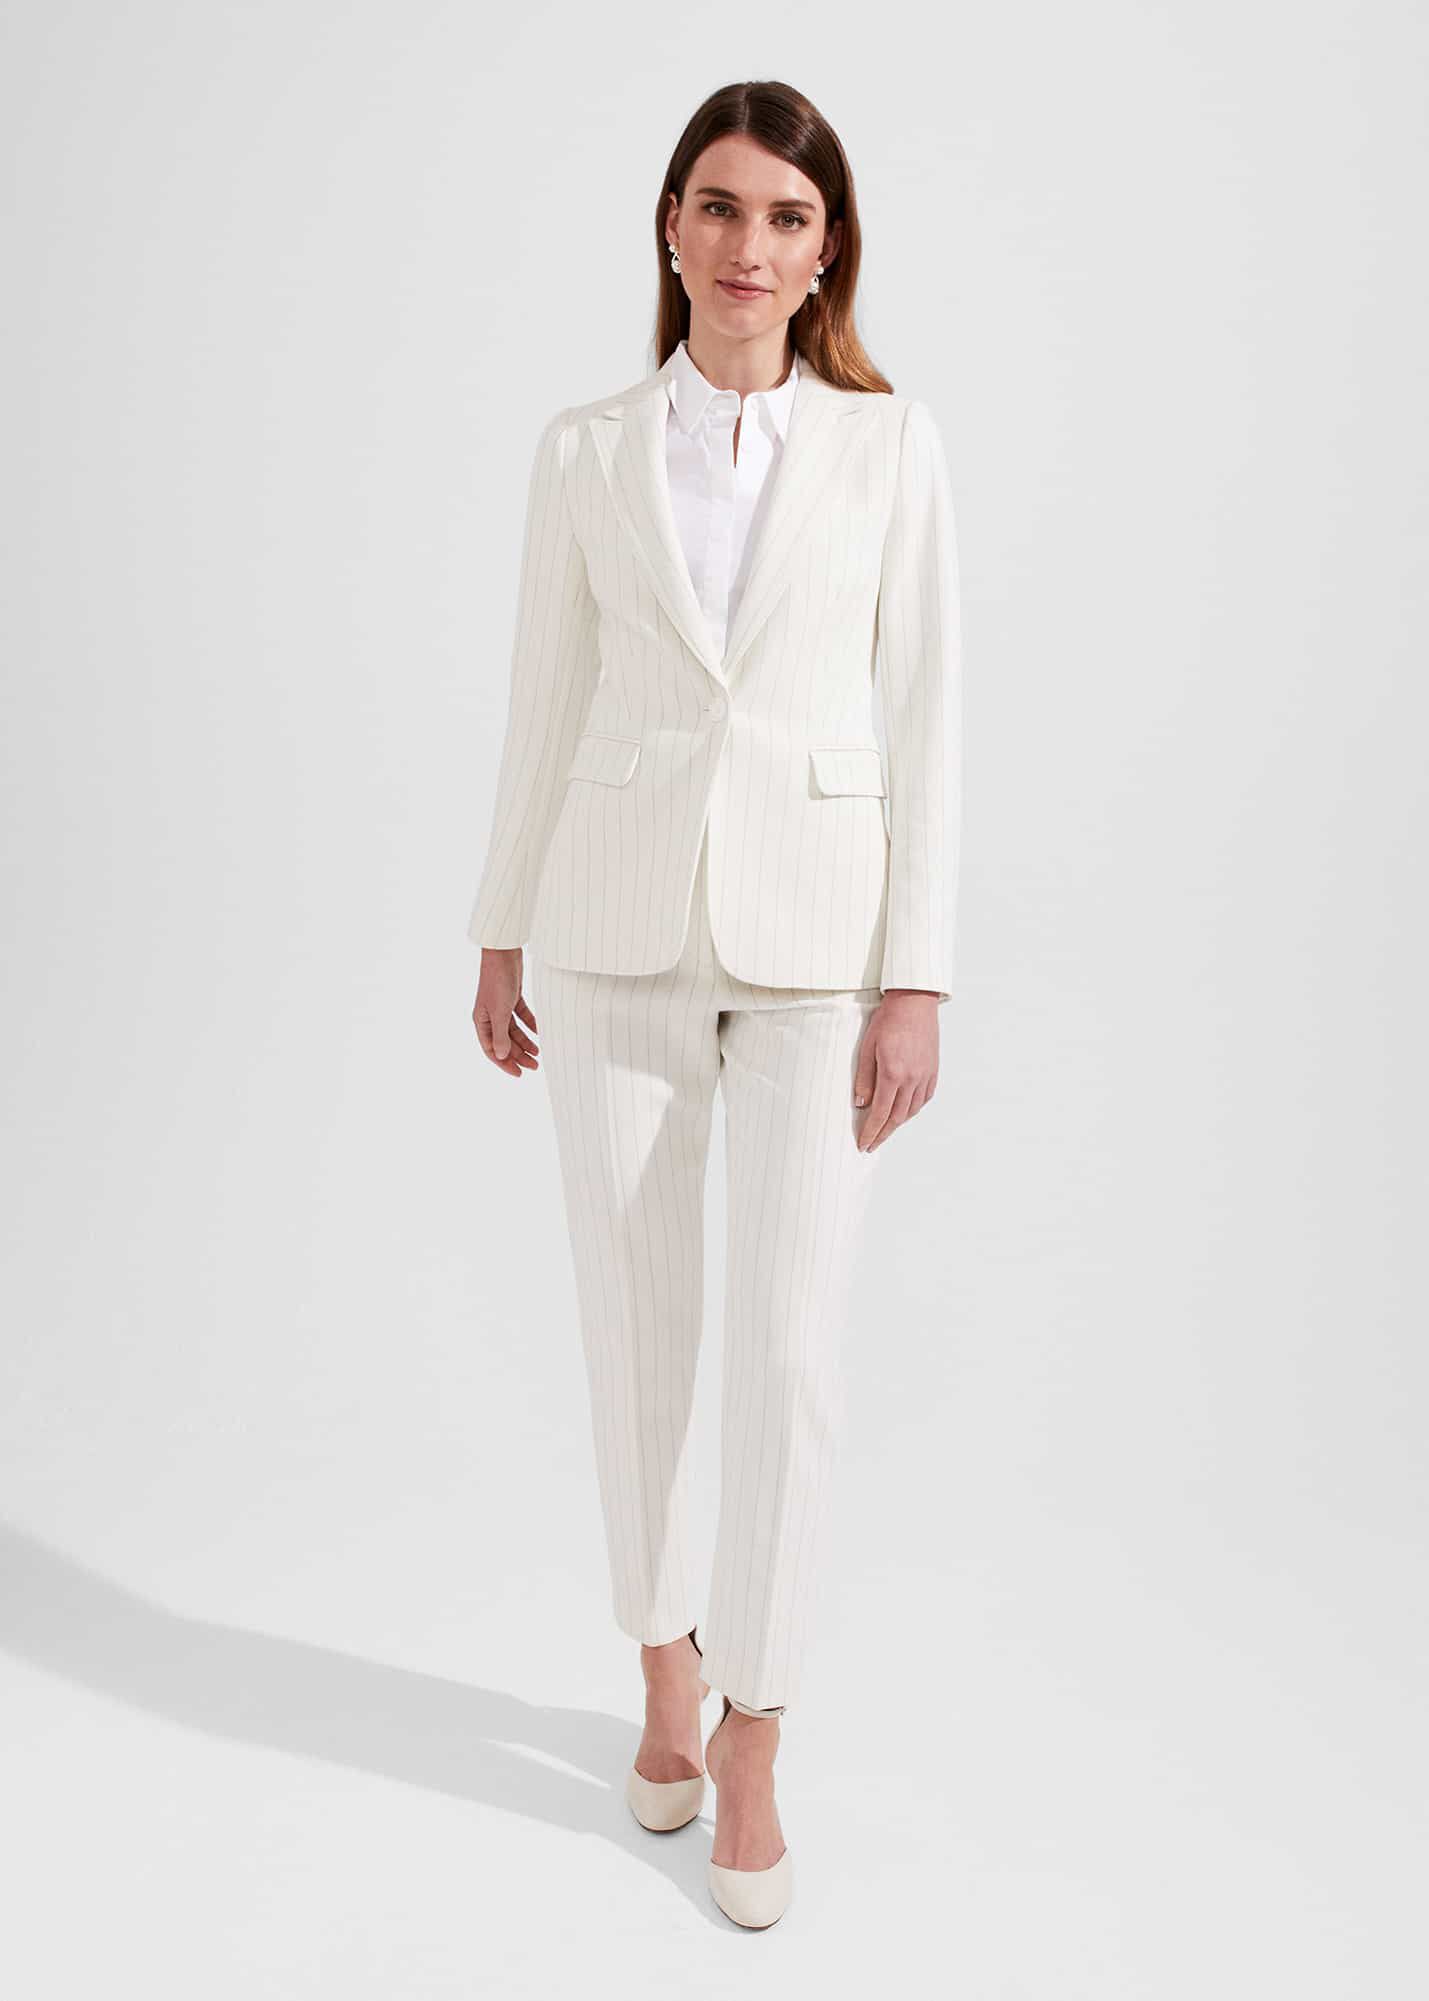 Navy One Button Blazer + Mid-High Rise Flare Trousers Suit Pantsuit For  Ladies